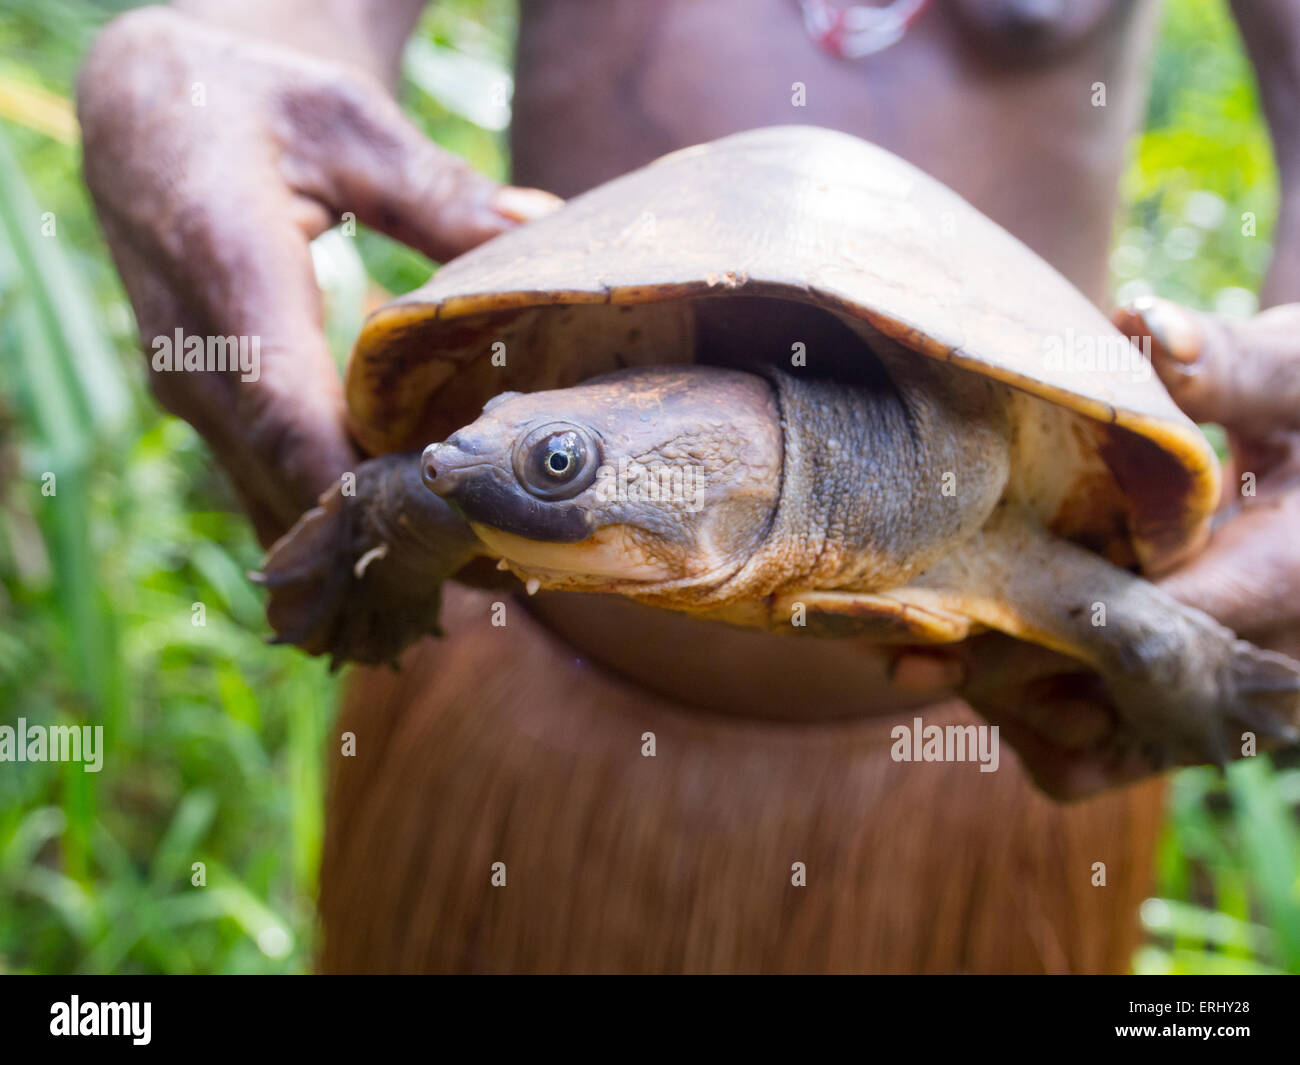 Wild turtle caught in the jungle laying upside down. Stock Photo